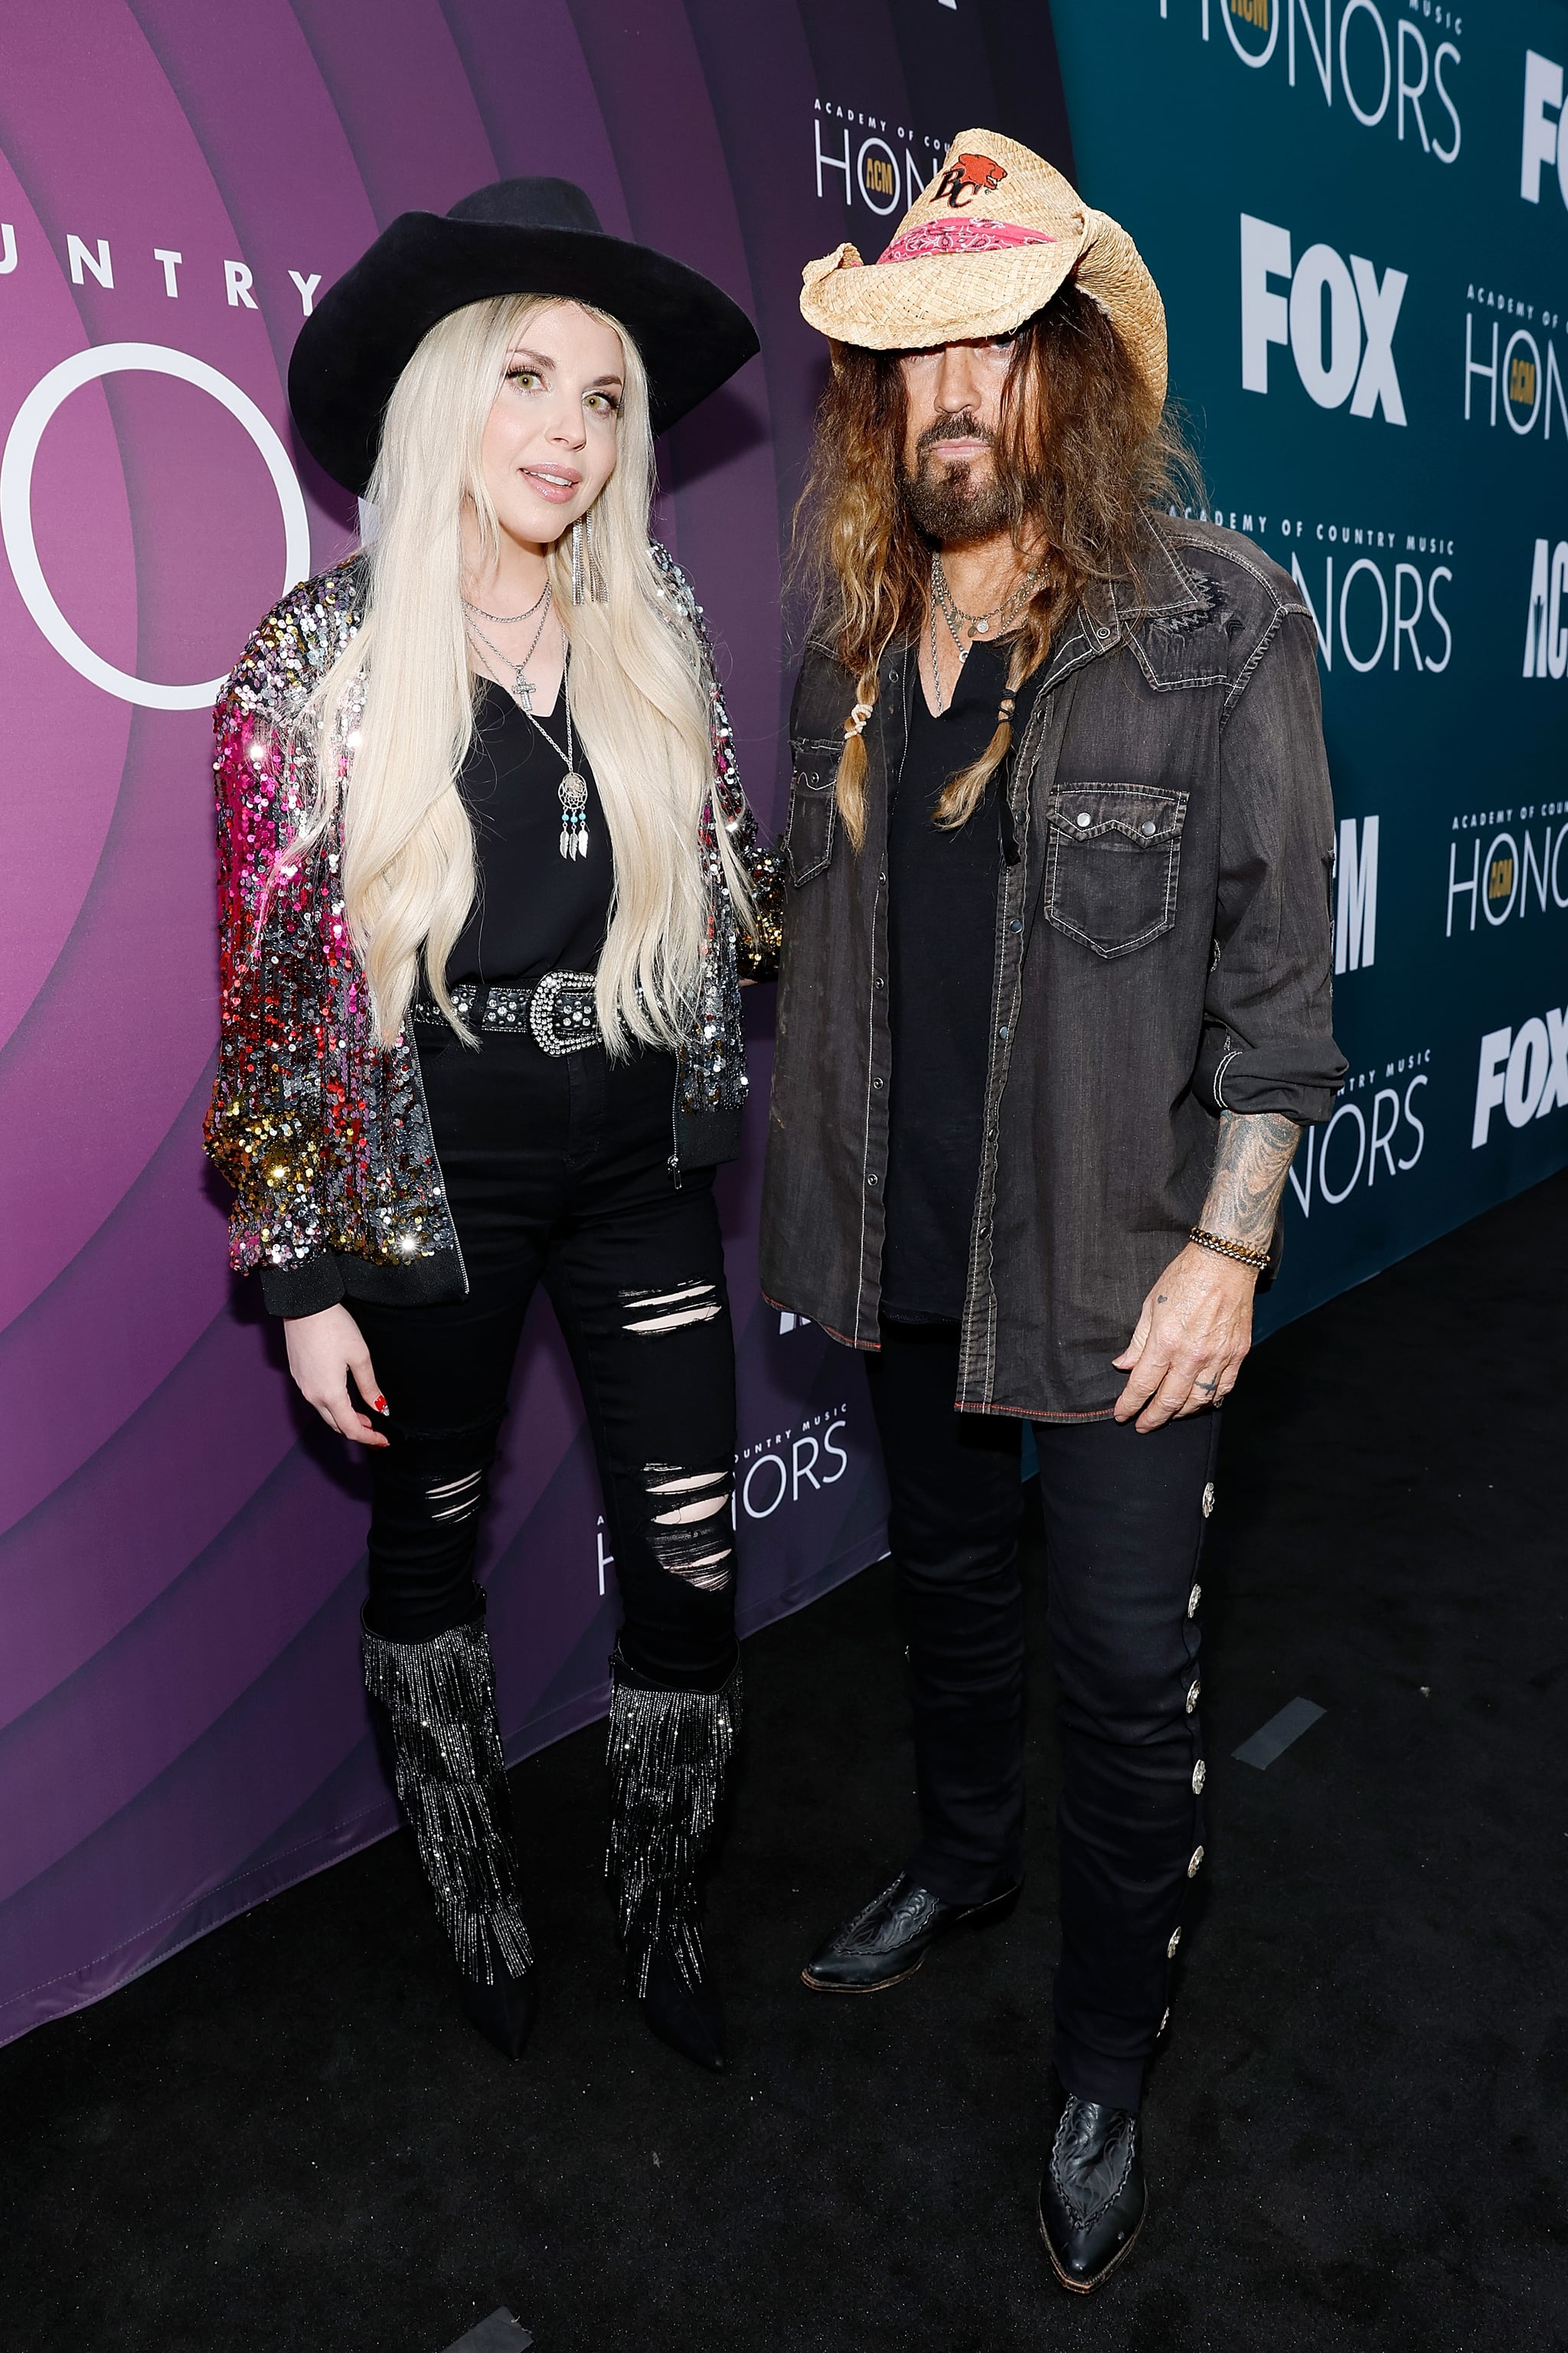 NASHVILLE, TENNESSEE - AUGUST 23: (L-R) FIREROSE and Billy Ray Cyrus attend the 16th Annual Academy of Country Music Honours at Ryman Auditorium on August 23, 2023 in Nashville, Tennessee. (Photo by Jason Kempin/Getty Images for ACM)